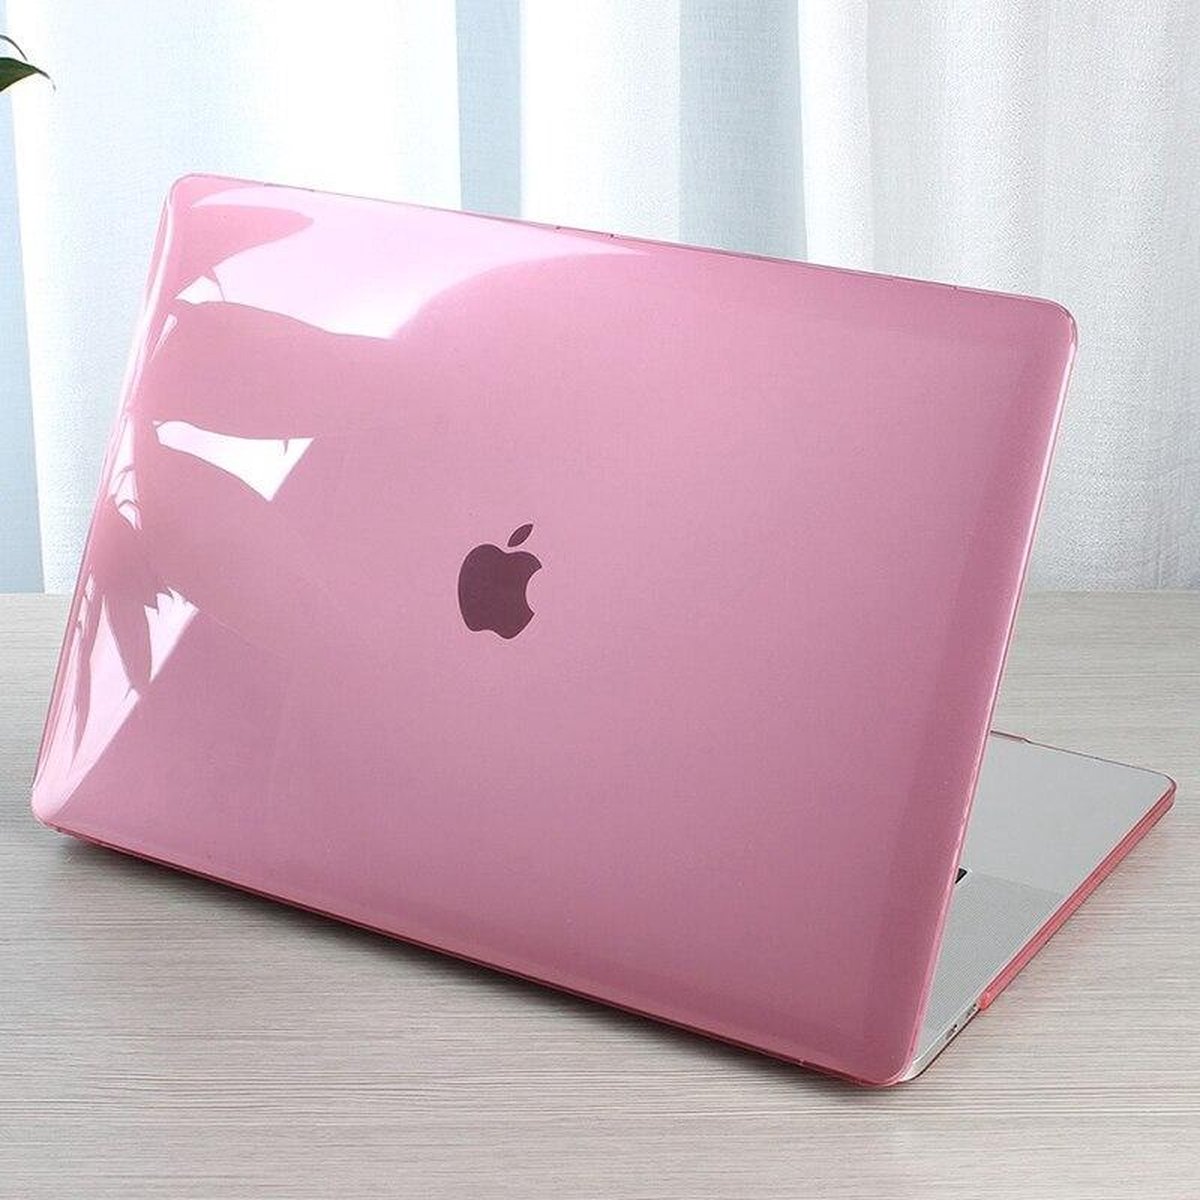 Hardcover Case Cover Geschikt Voor Apple Macbook Pro 16 Inch 2019/2020 (A2141) Hard Shell Hoes - Notebook Sleeve Skin Protector Hardshell - Hardcase Beschermhoes - Crystal Clear - Roze